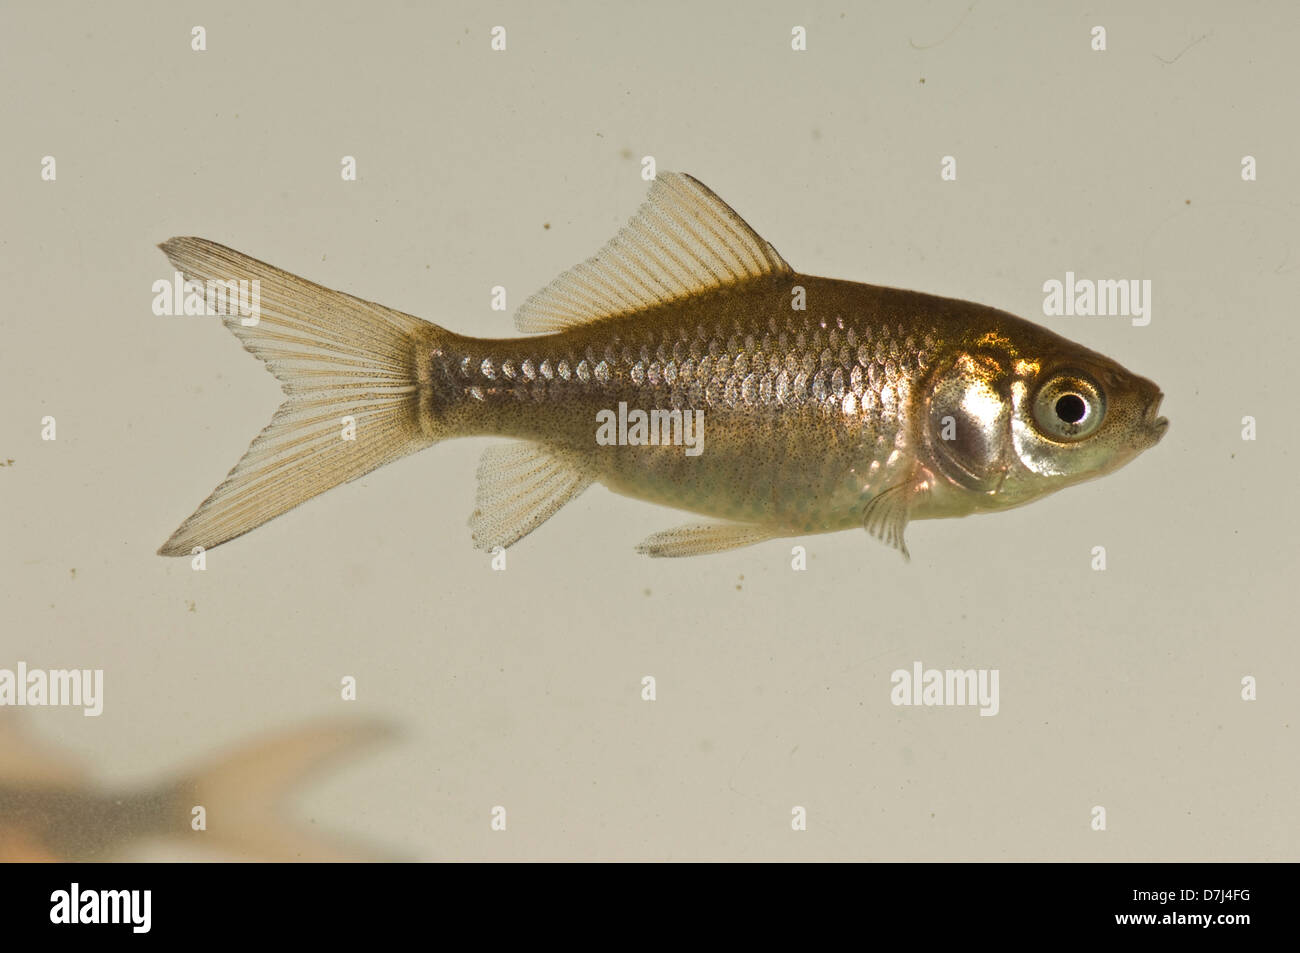 A young goldfish, Carassius auratus auratus, brown & silver colour but lacking the gold or orange of adult fish Stock Photo